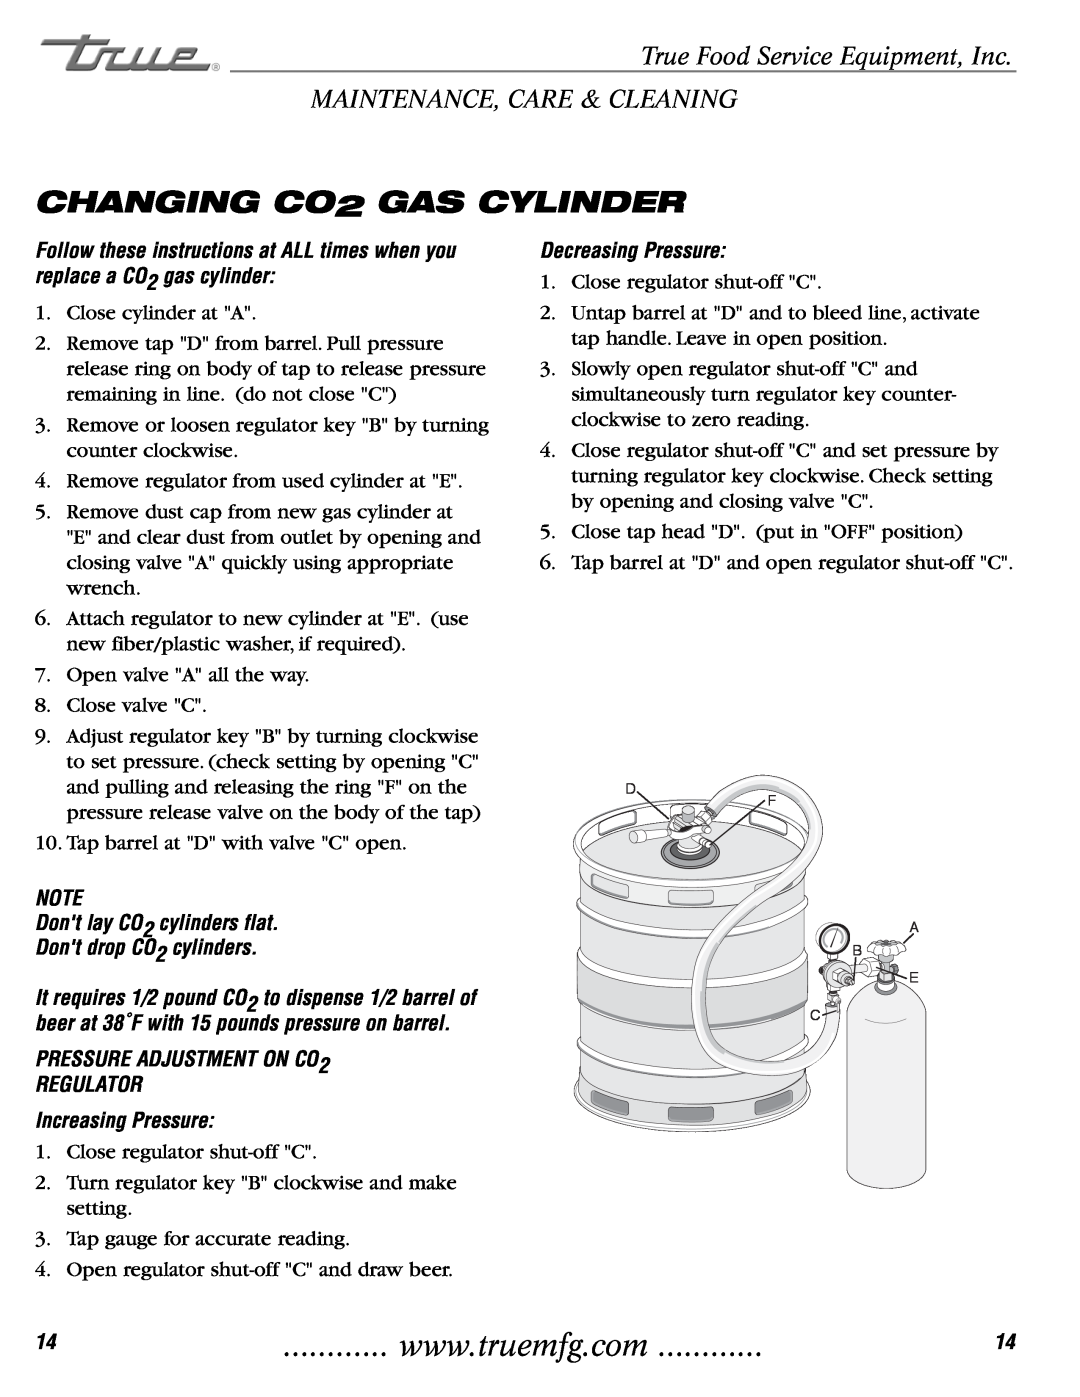 True Manufacturing Company TDD-4 CHANGING CO2 GAS CYLINDER, True Food Service Equipment, Inc MAINTENANCE, CARE & CLEANING 